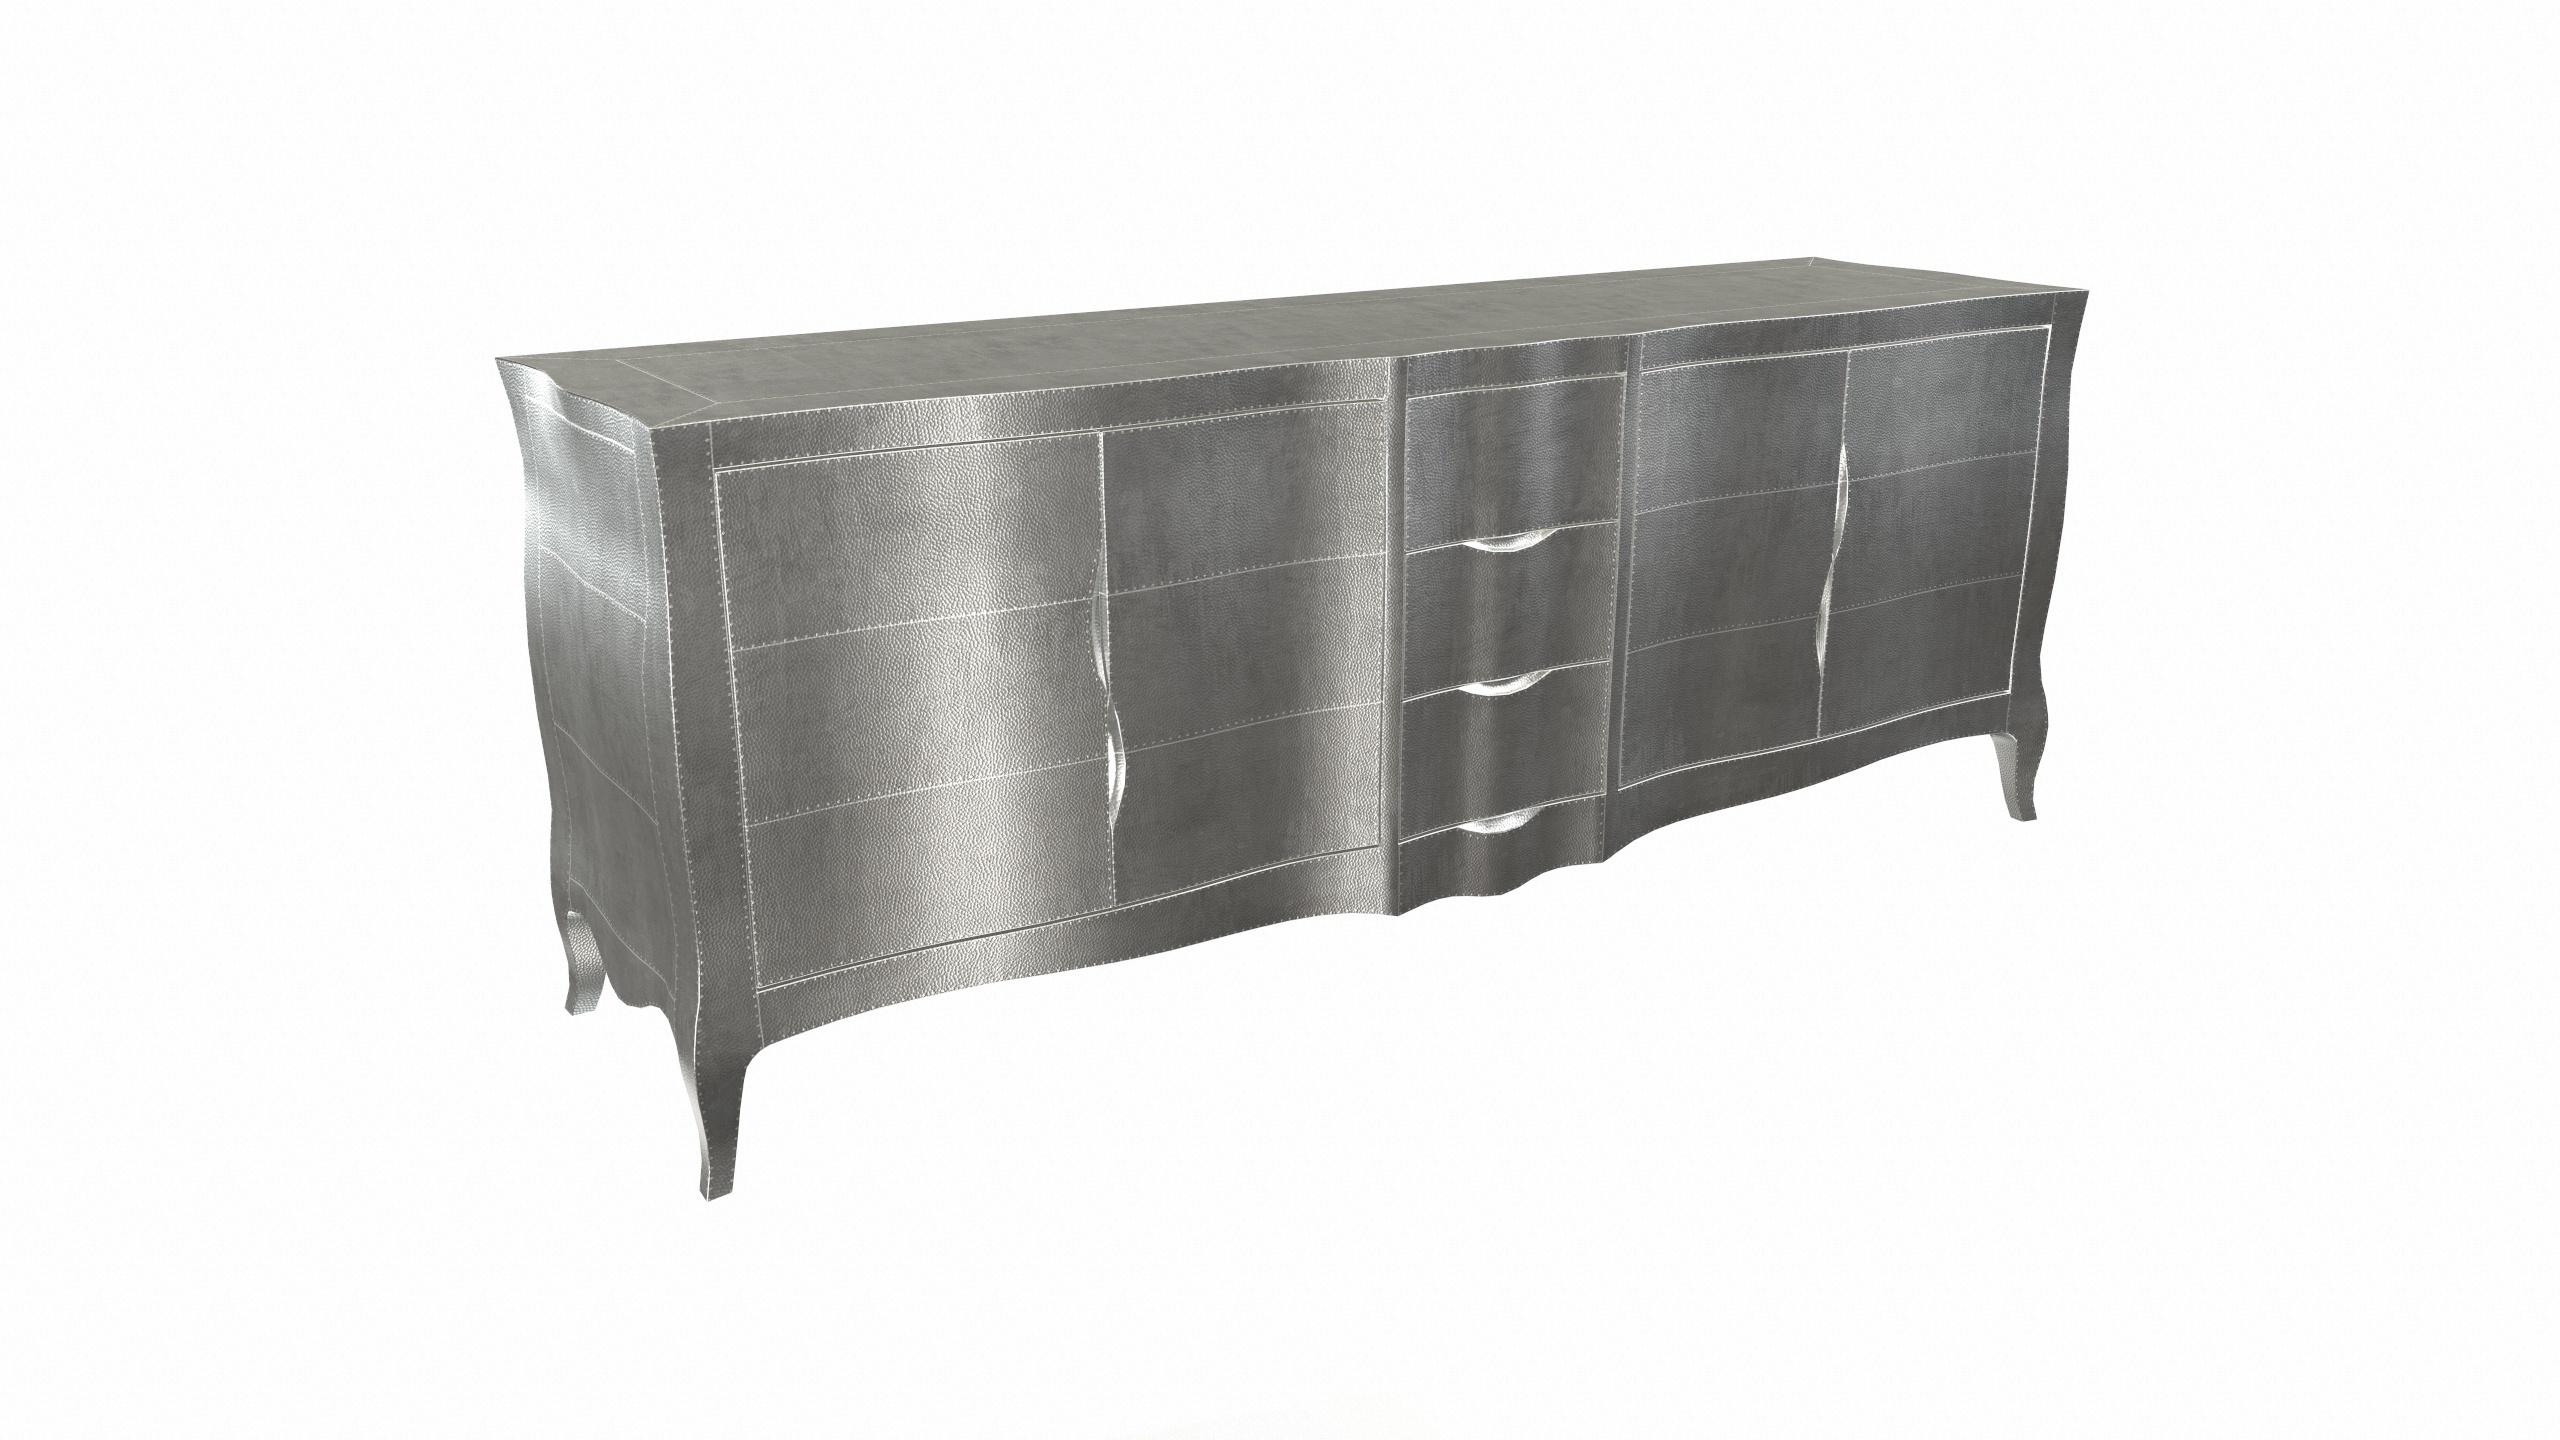 Contemporary Louise Credenza Art Deco Dressers in Mid. Hammered White Bronze by Paul Mathieu For Sale